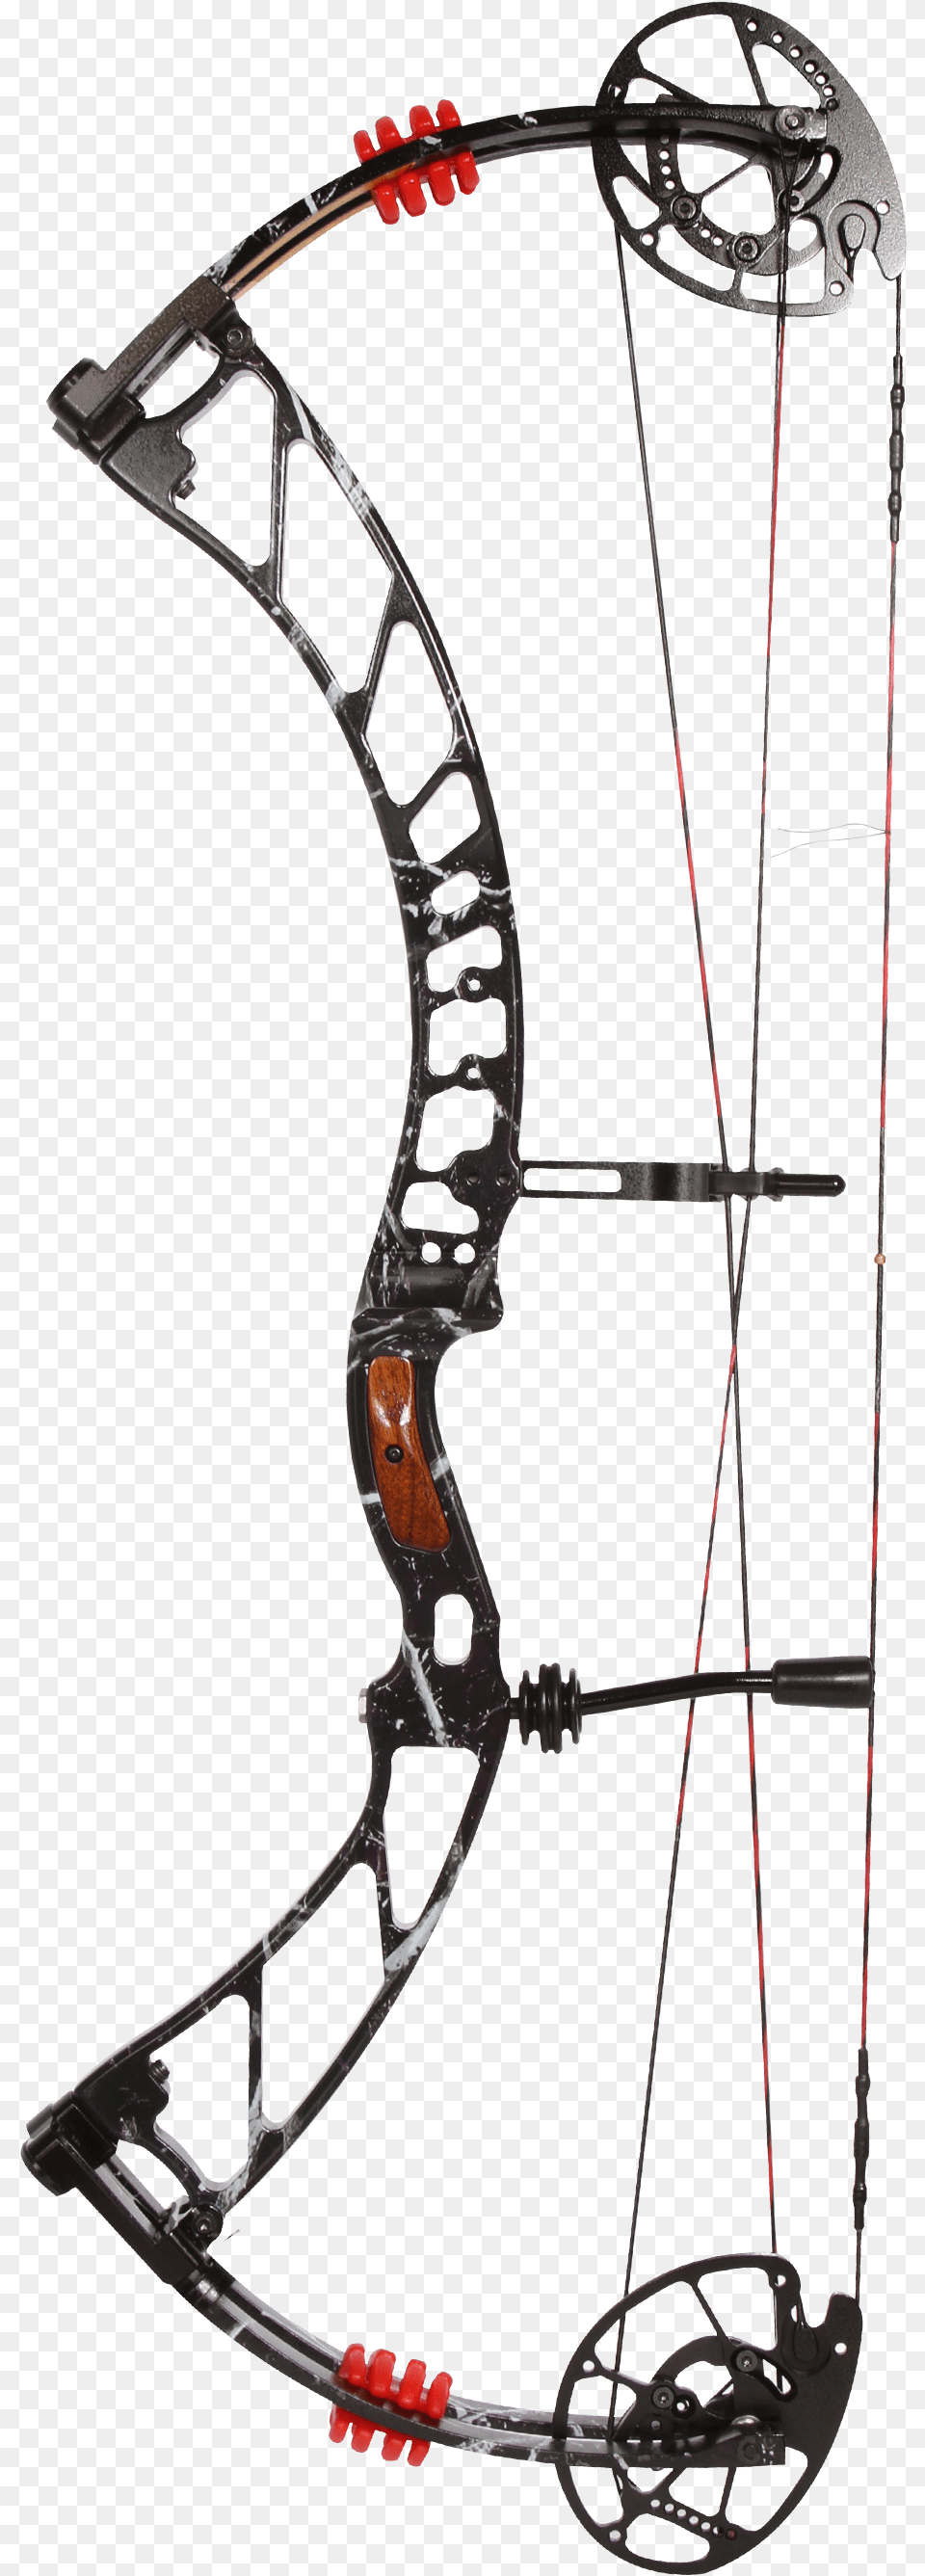 Sanlida Velocity X10 Advanced Hunting Compound Bow Obsession Bow Mossy Oak Bottomland, Weapon, Machine, Wheel Free Png